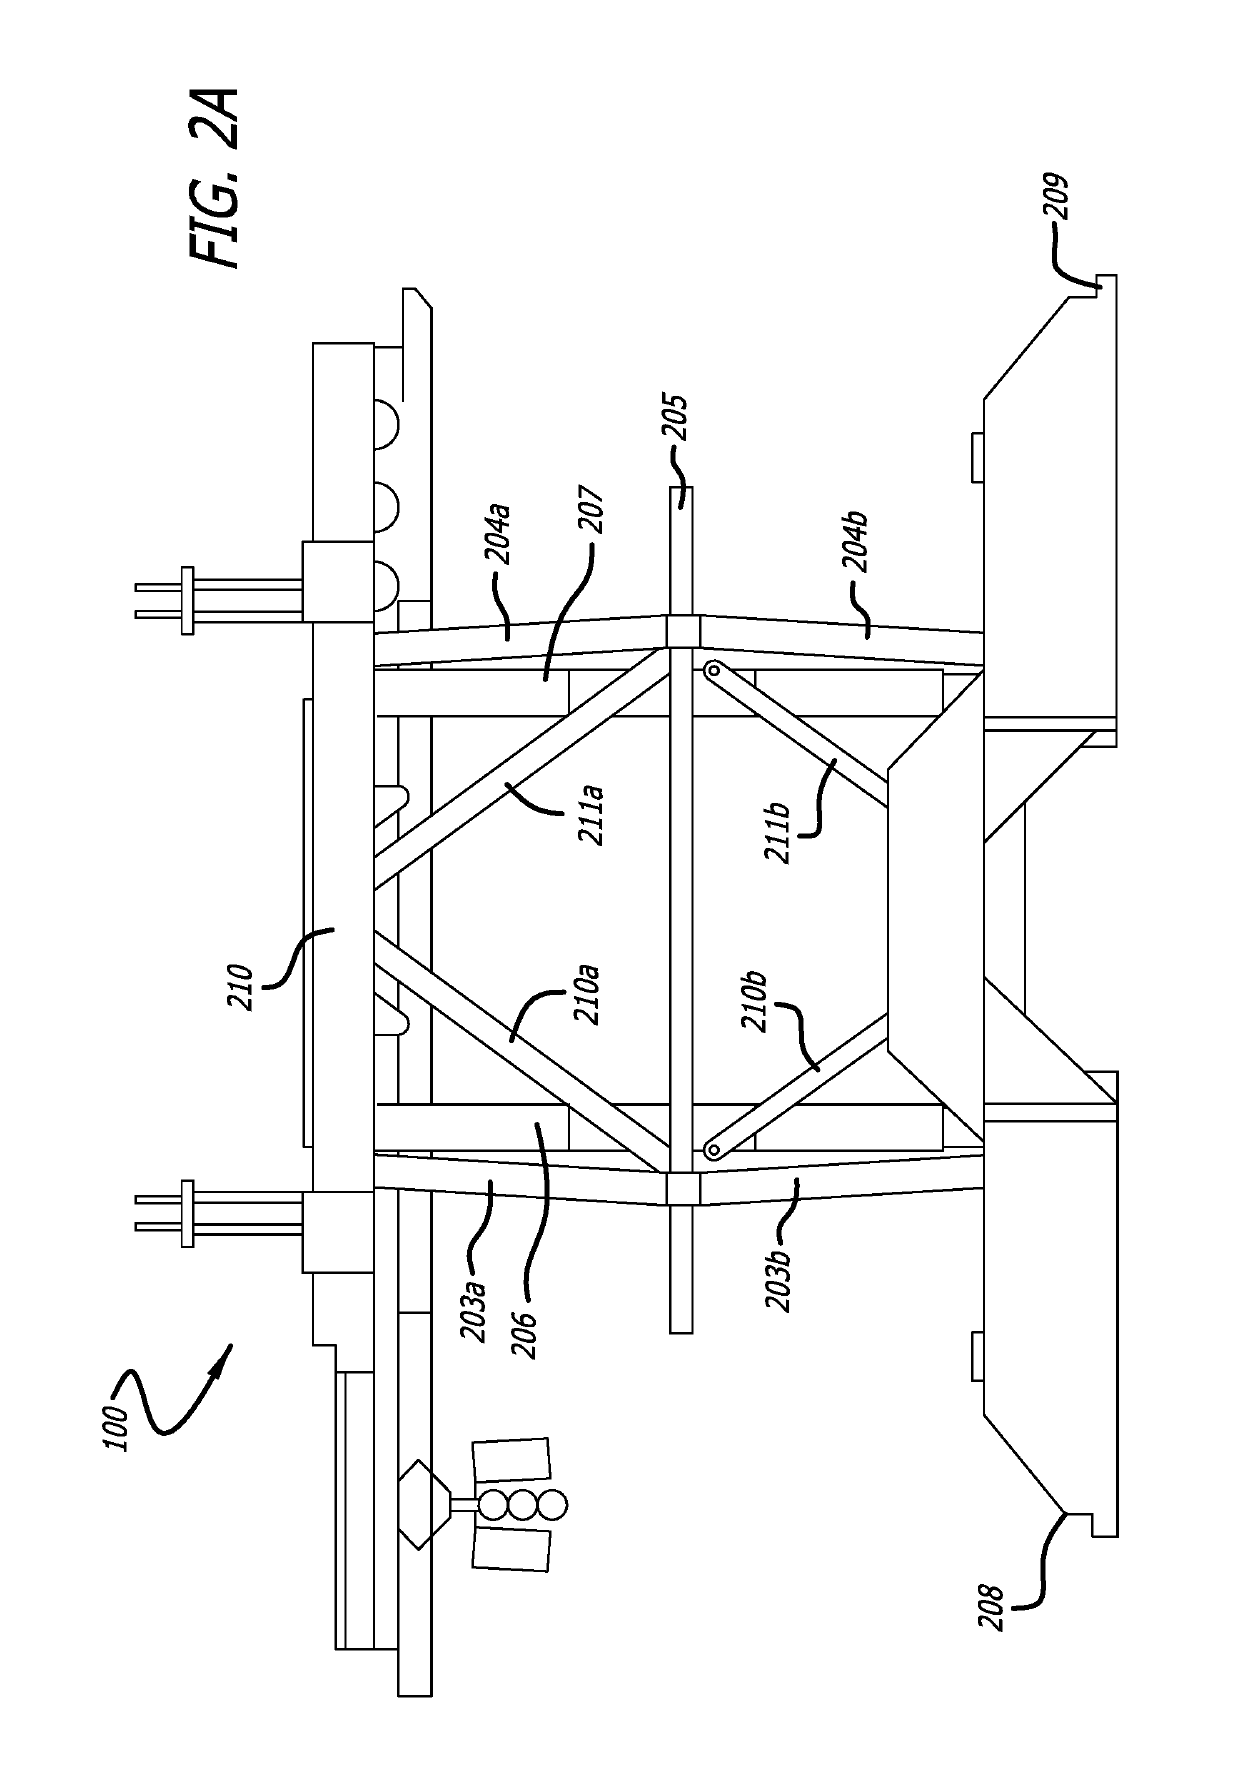 Drilling rig and method of use